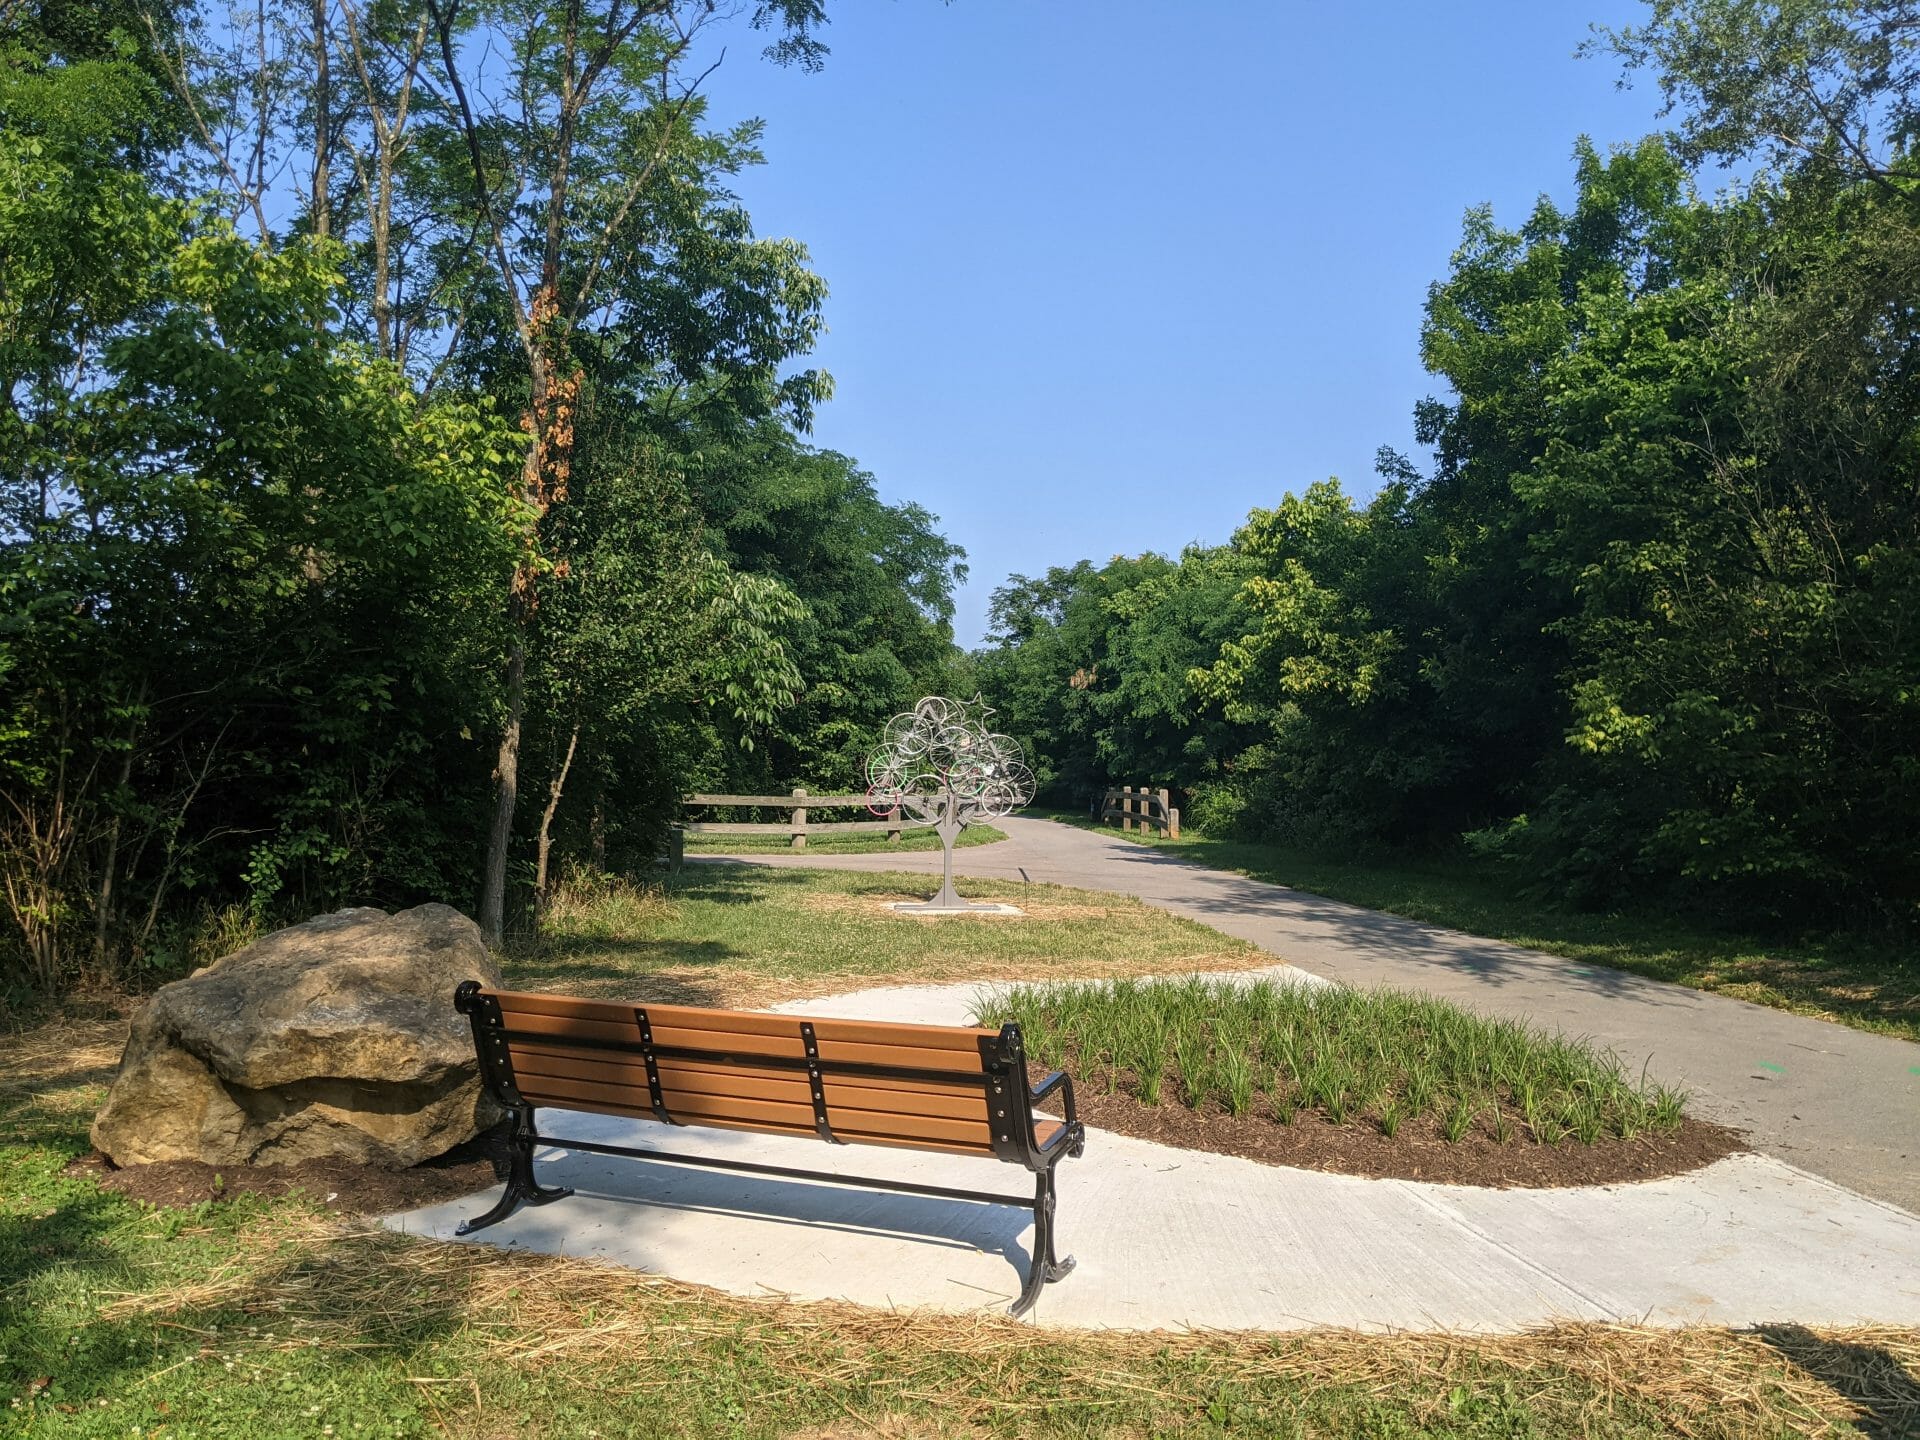 Plaza along the greenway path with a bench facing a sculpture